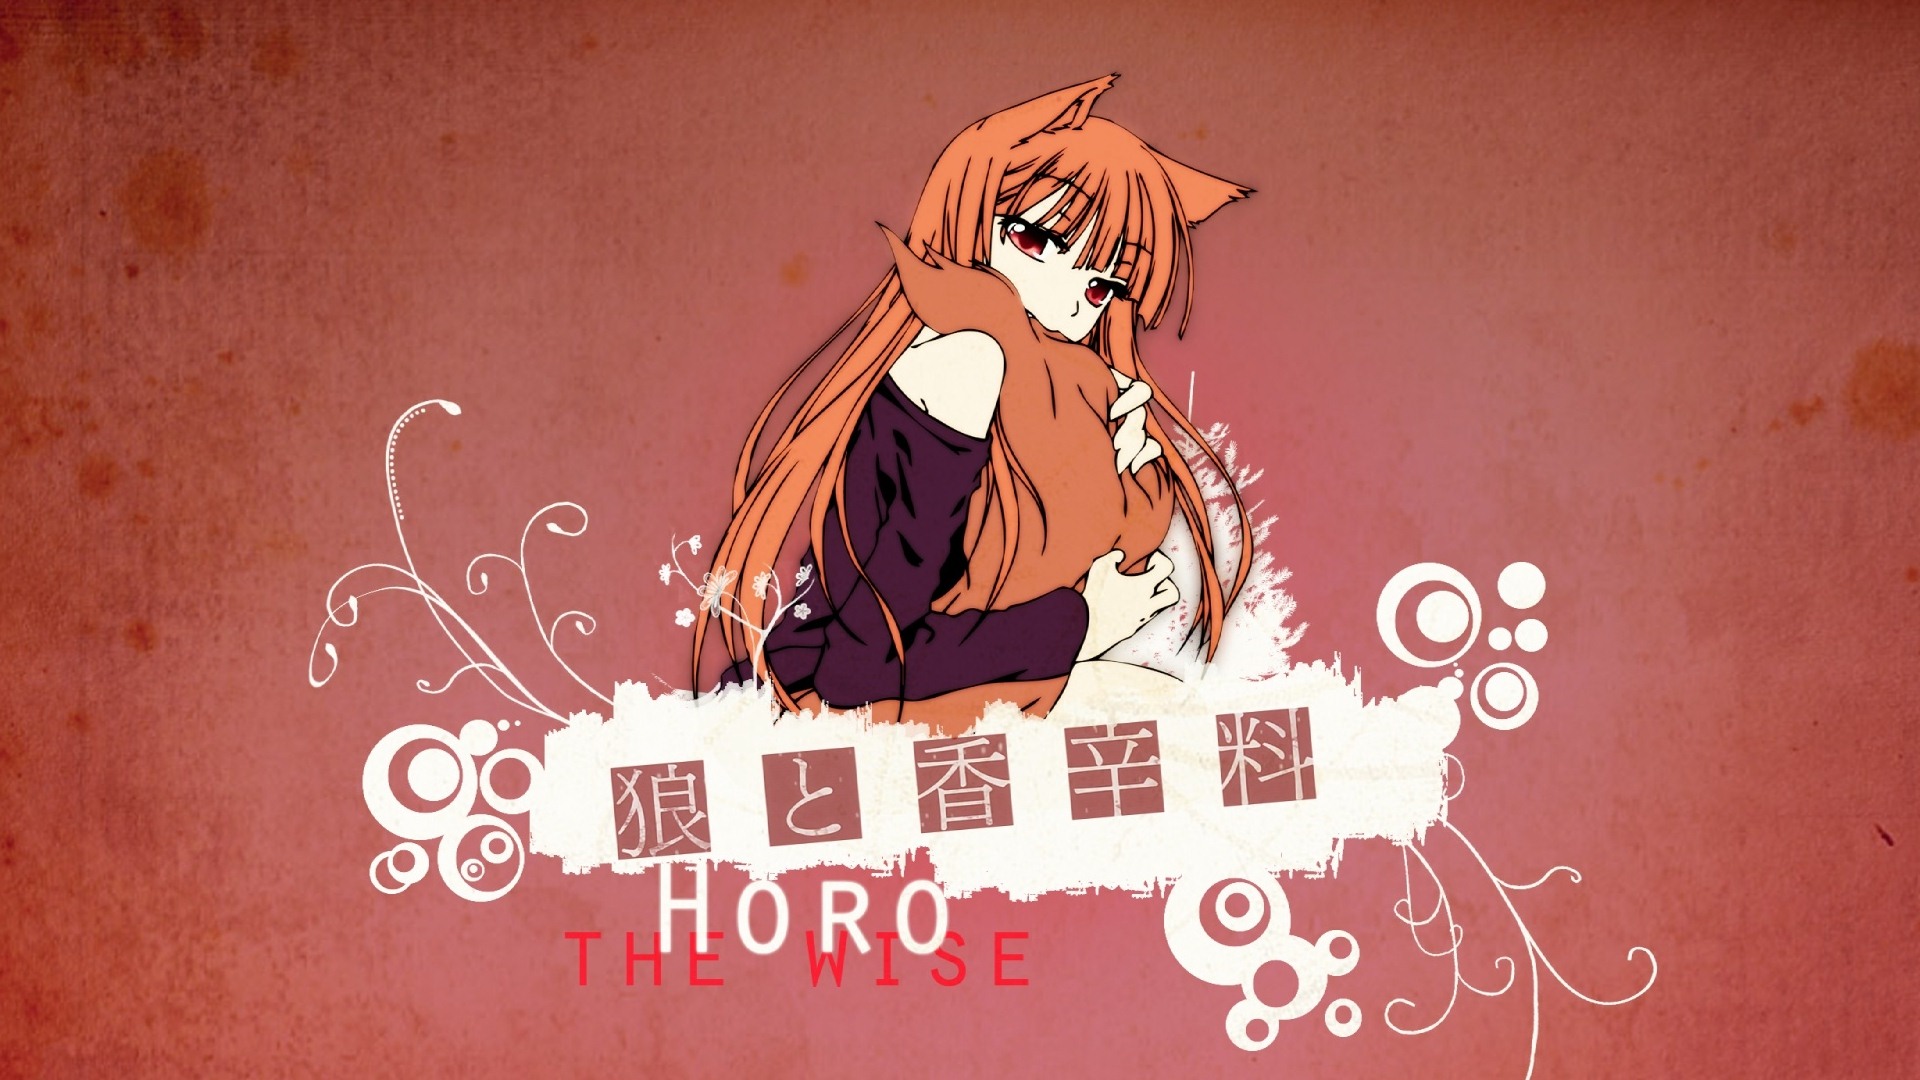 Spice and Wolf HD Wallpaper #6 - 1920x1080